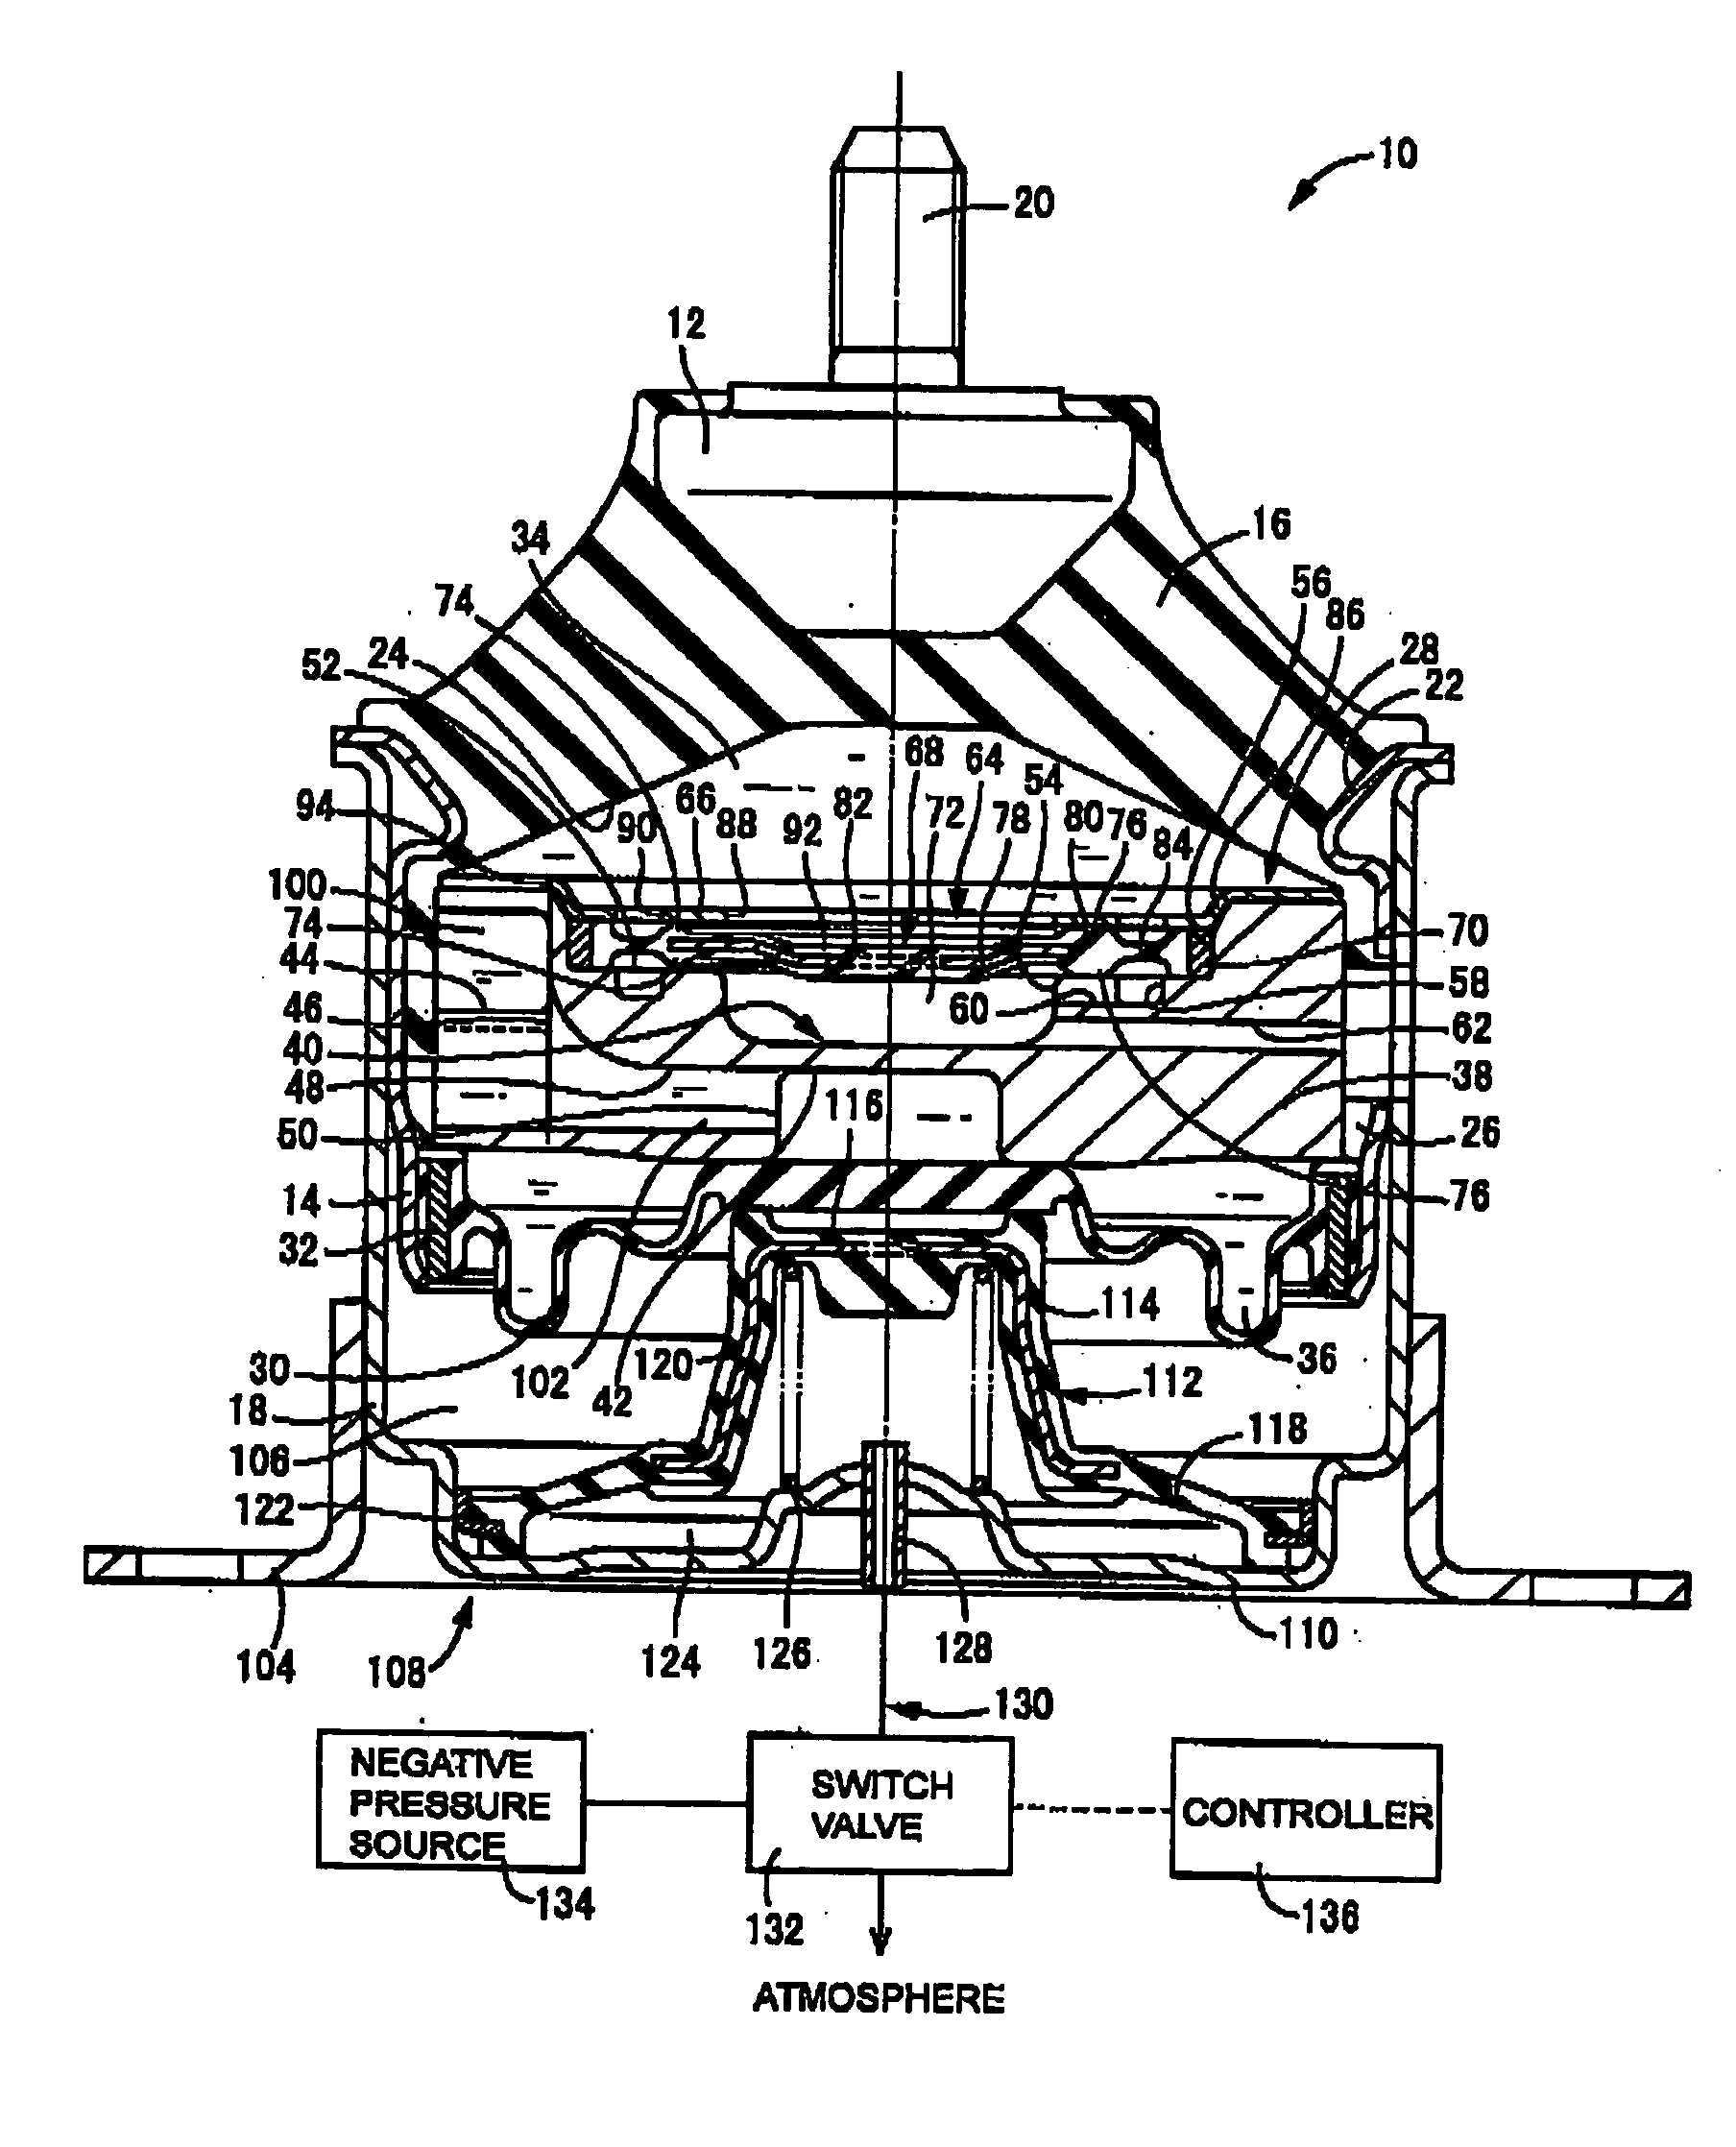 Pneumatically switchable type fluid-filled engine mount